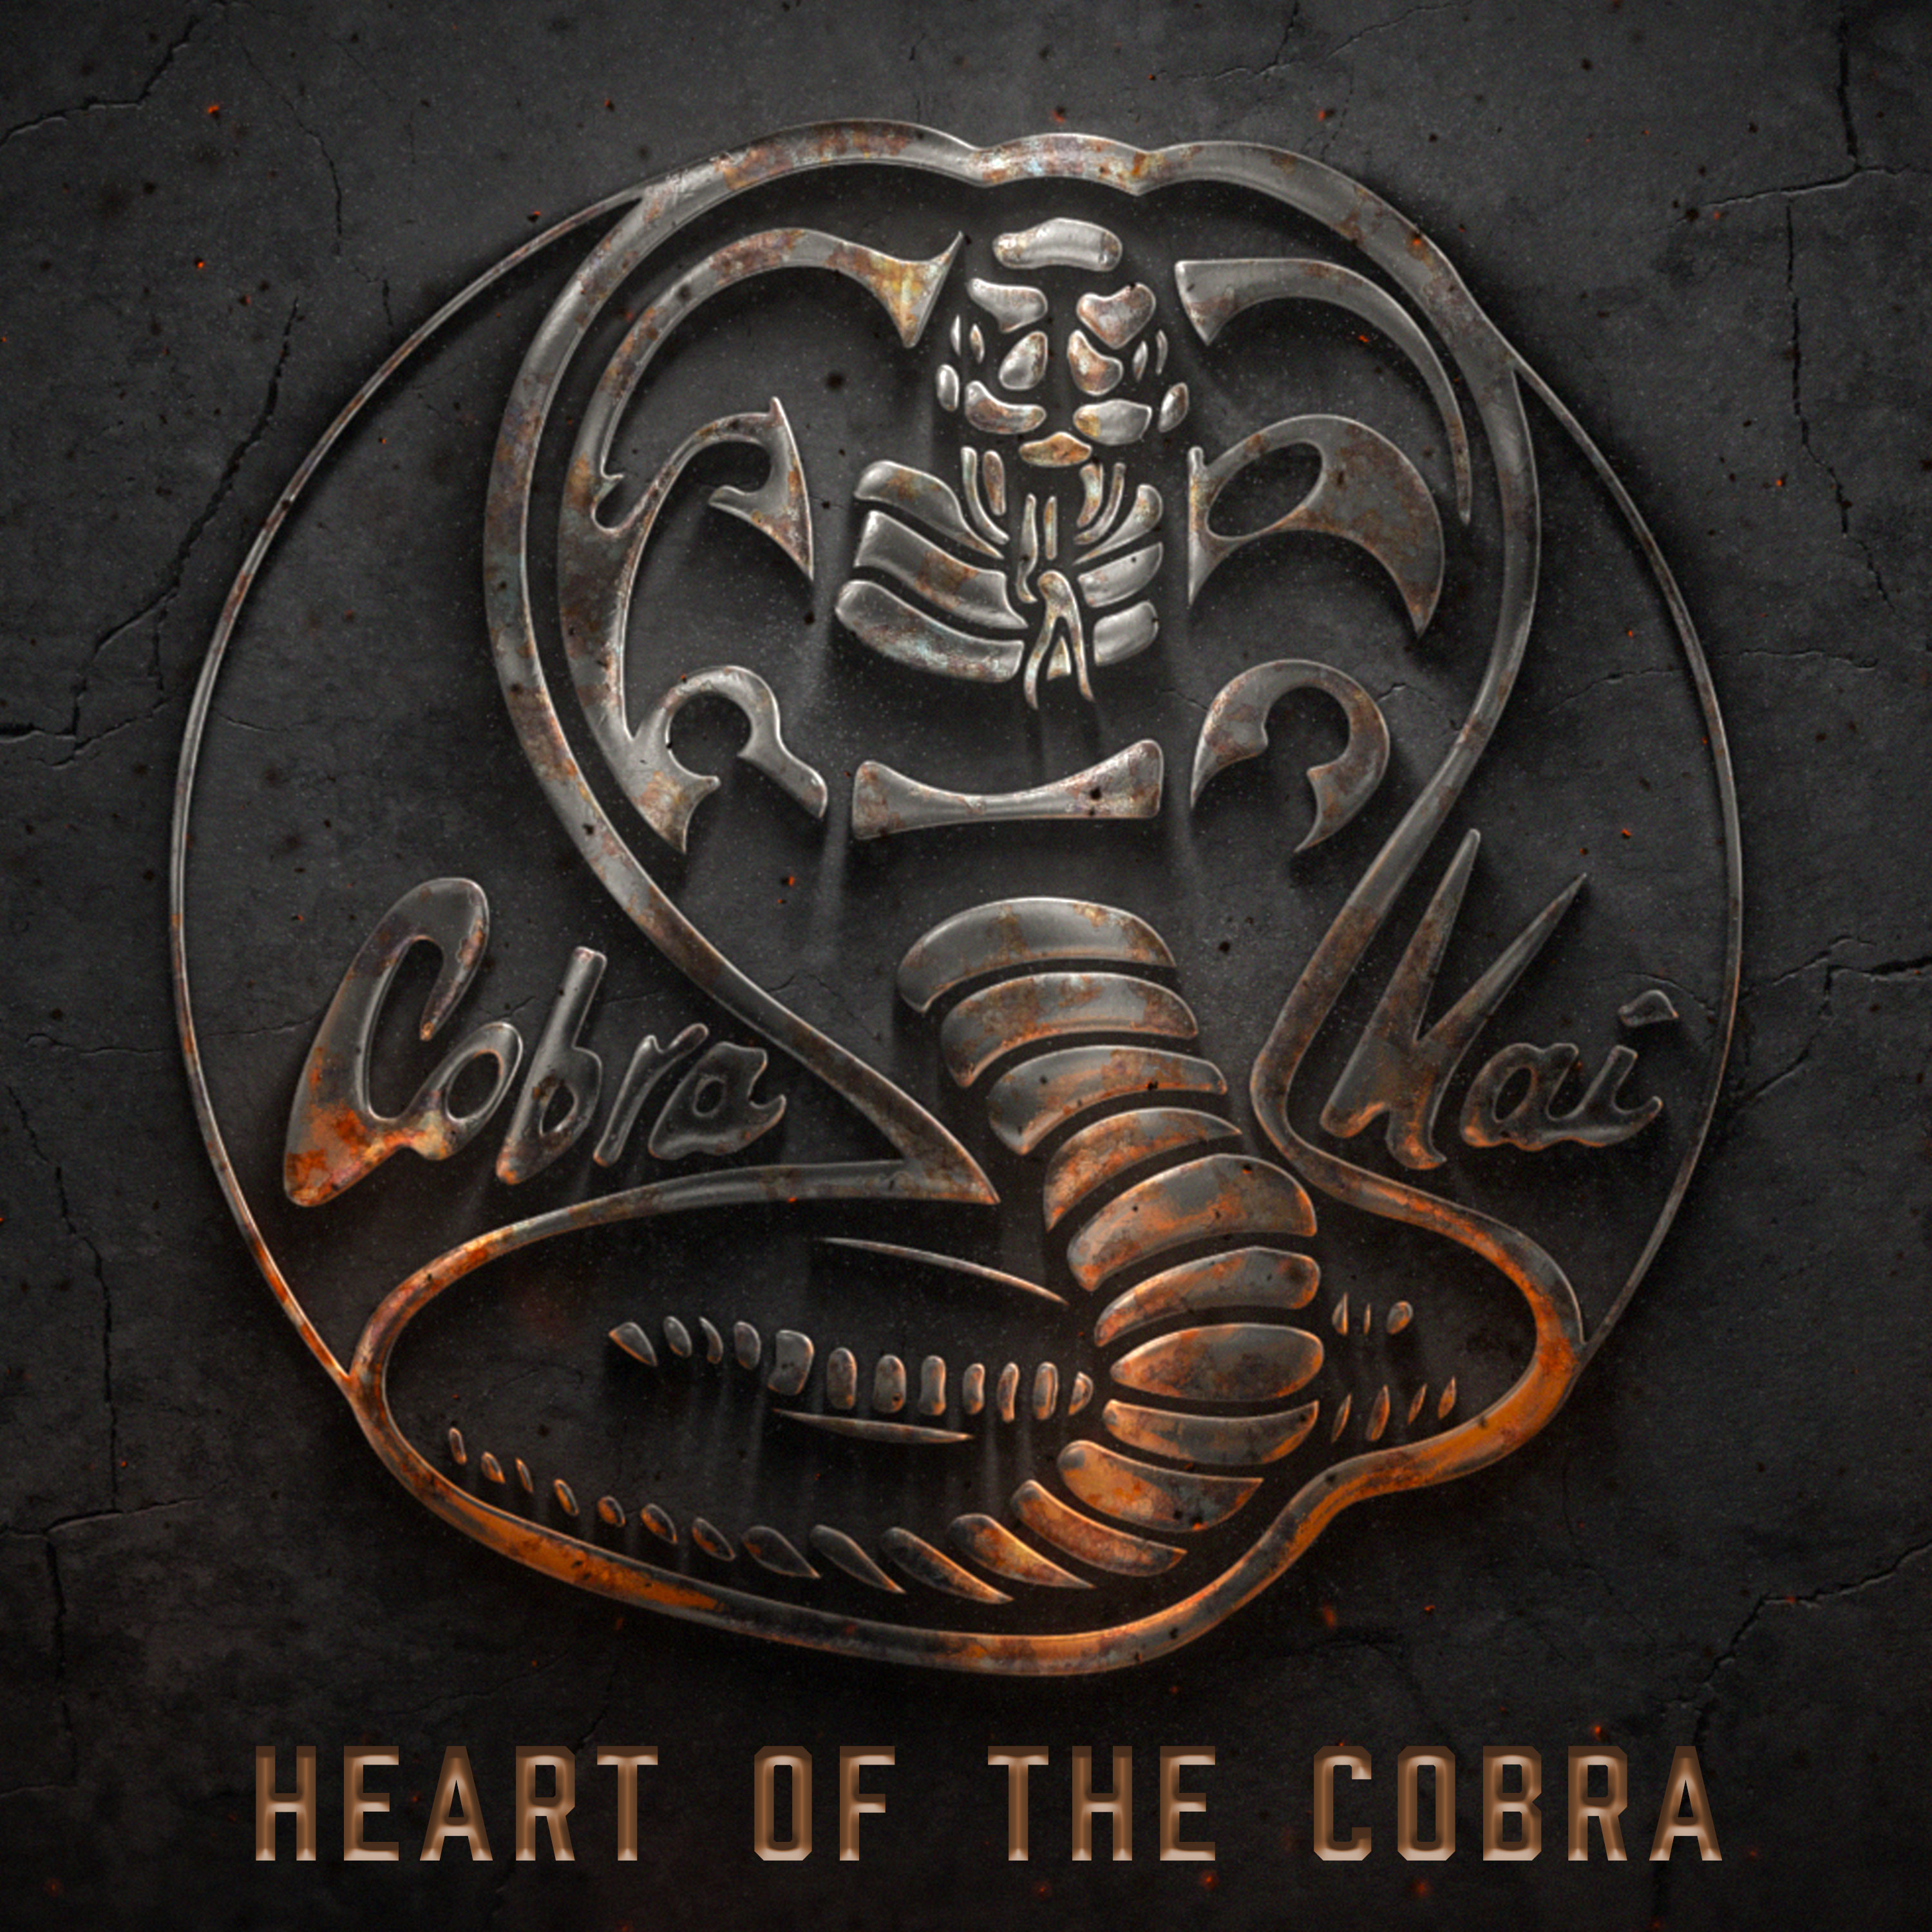 Get Pumped For Cobra Kai Season 6 With New Soundtrack Single “Heart Of The Cobra”